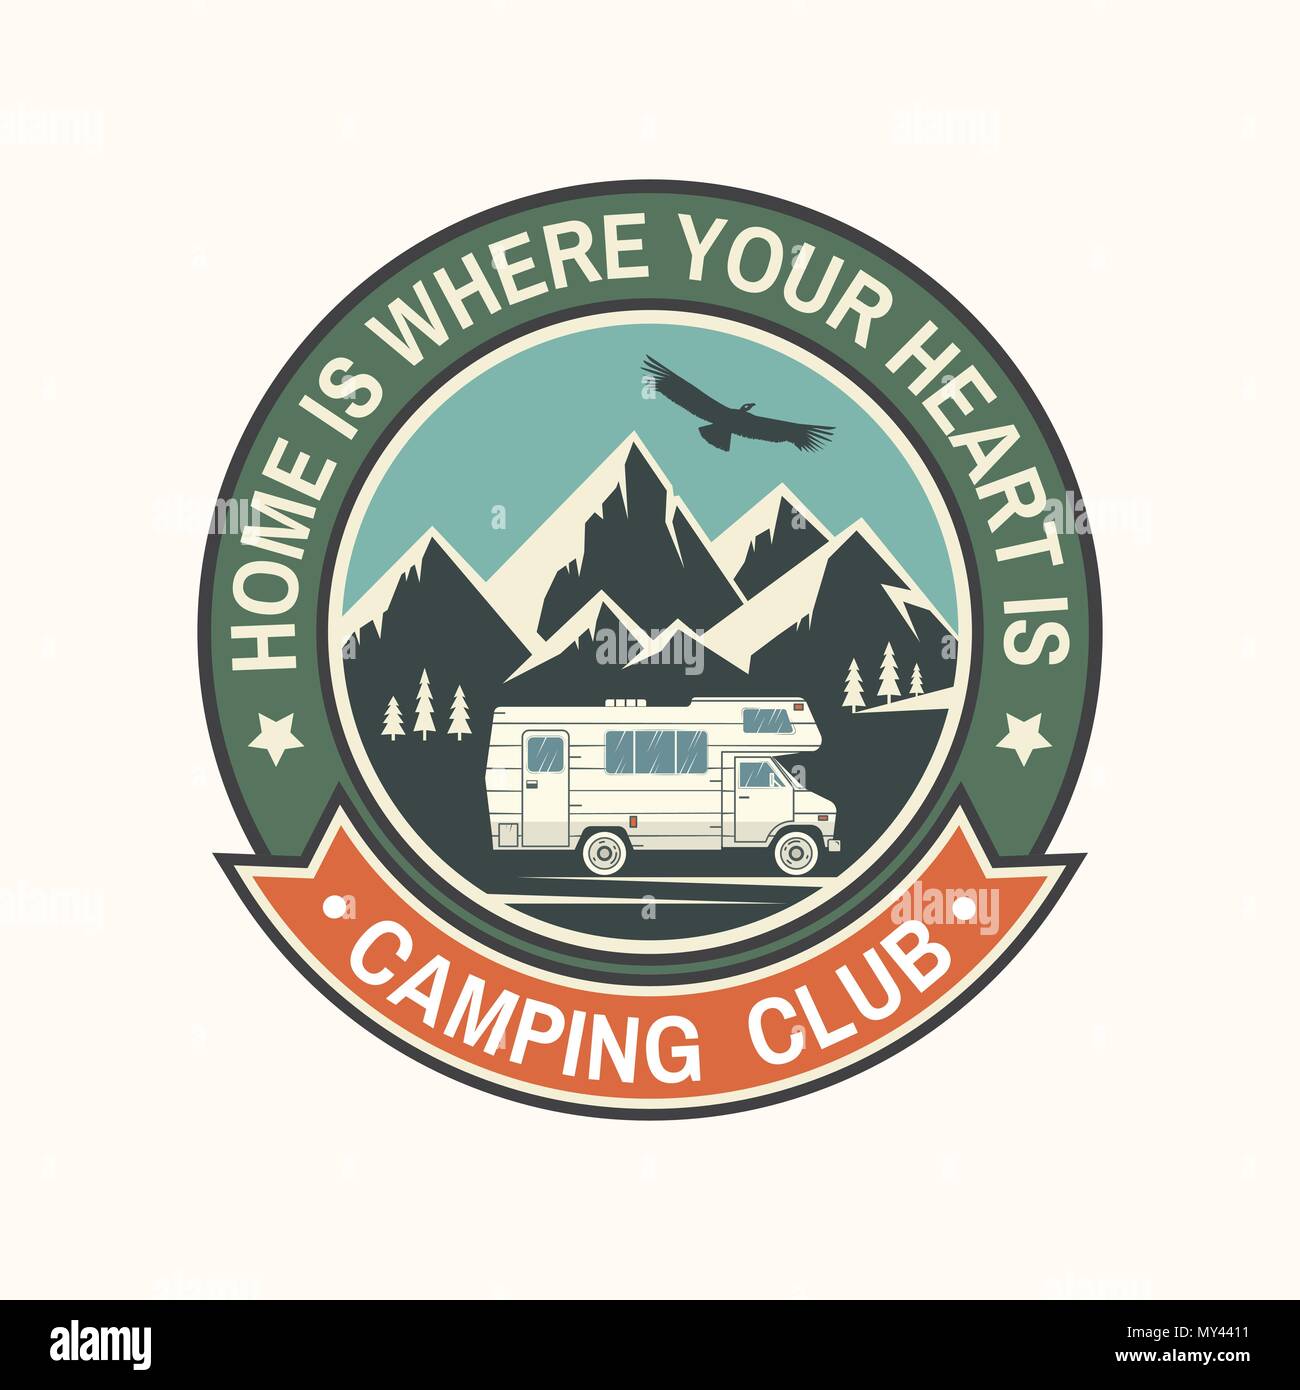 Camper and caravaning club. Vector illustration. Concept for shirt or logo, print, stamp or tee. Vintage typography design with Camper trailer and mountain silhouette. Stock Vector